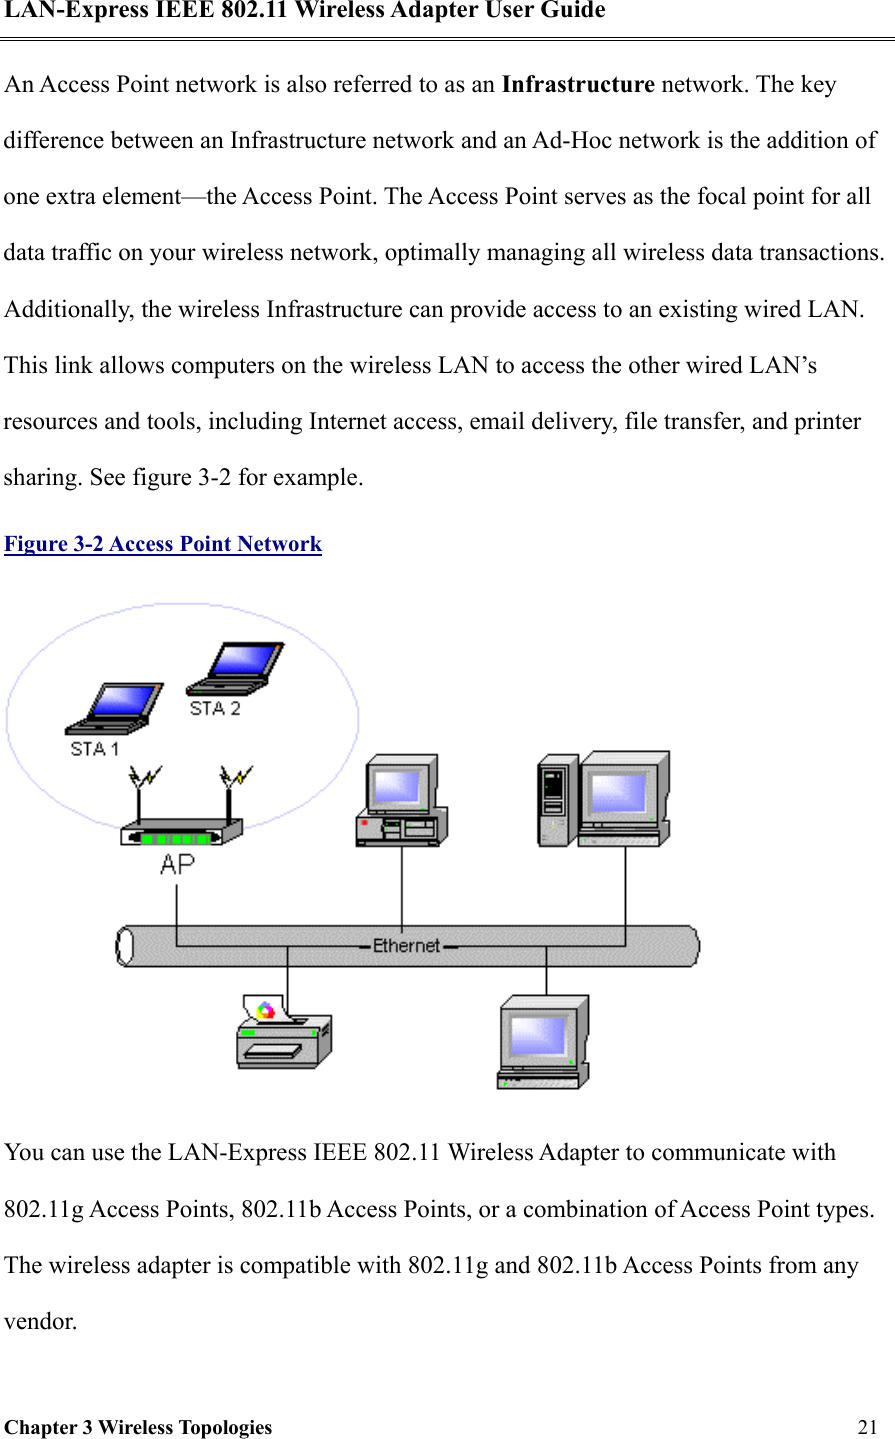 LAN-Express IEEE 802.11 Wireless Adapter User Guide Chapter 3 Wireless Topologies   21  An Access Point network is also referred to as an Infrastructure network. The key difference between an Infrastructure network and an Ad-Hoc network is the addition of one extra element—the Access Point. The Access Point serves as the focal point for all data traffic on your wireless network, optimally managing all wireless data transactions.  Additionally, the wireless Infrastructure can provide access to an existing wired LAN. This link allows computers on the wireless LAN to access the other wired LAN’s resources and tools, including Internet access, email delivery, file transfer, and printer sharing. See figure 3-2 for example.  Figure 3-2 Access Point Network  You can use the LAN-Express IEEE 802.11 Wireless Adapter to communicate with 802.11g Access Points, 802.11b Access Points, or a combination of Access Point types. The wireless adapter is compatible with 802.11g and 802.11b Access Points from any vendor. 